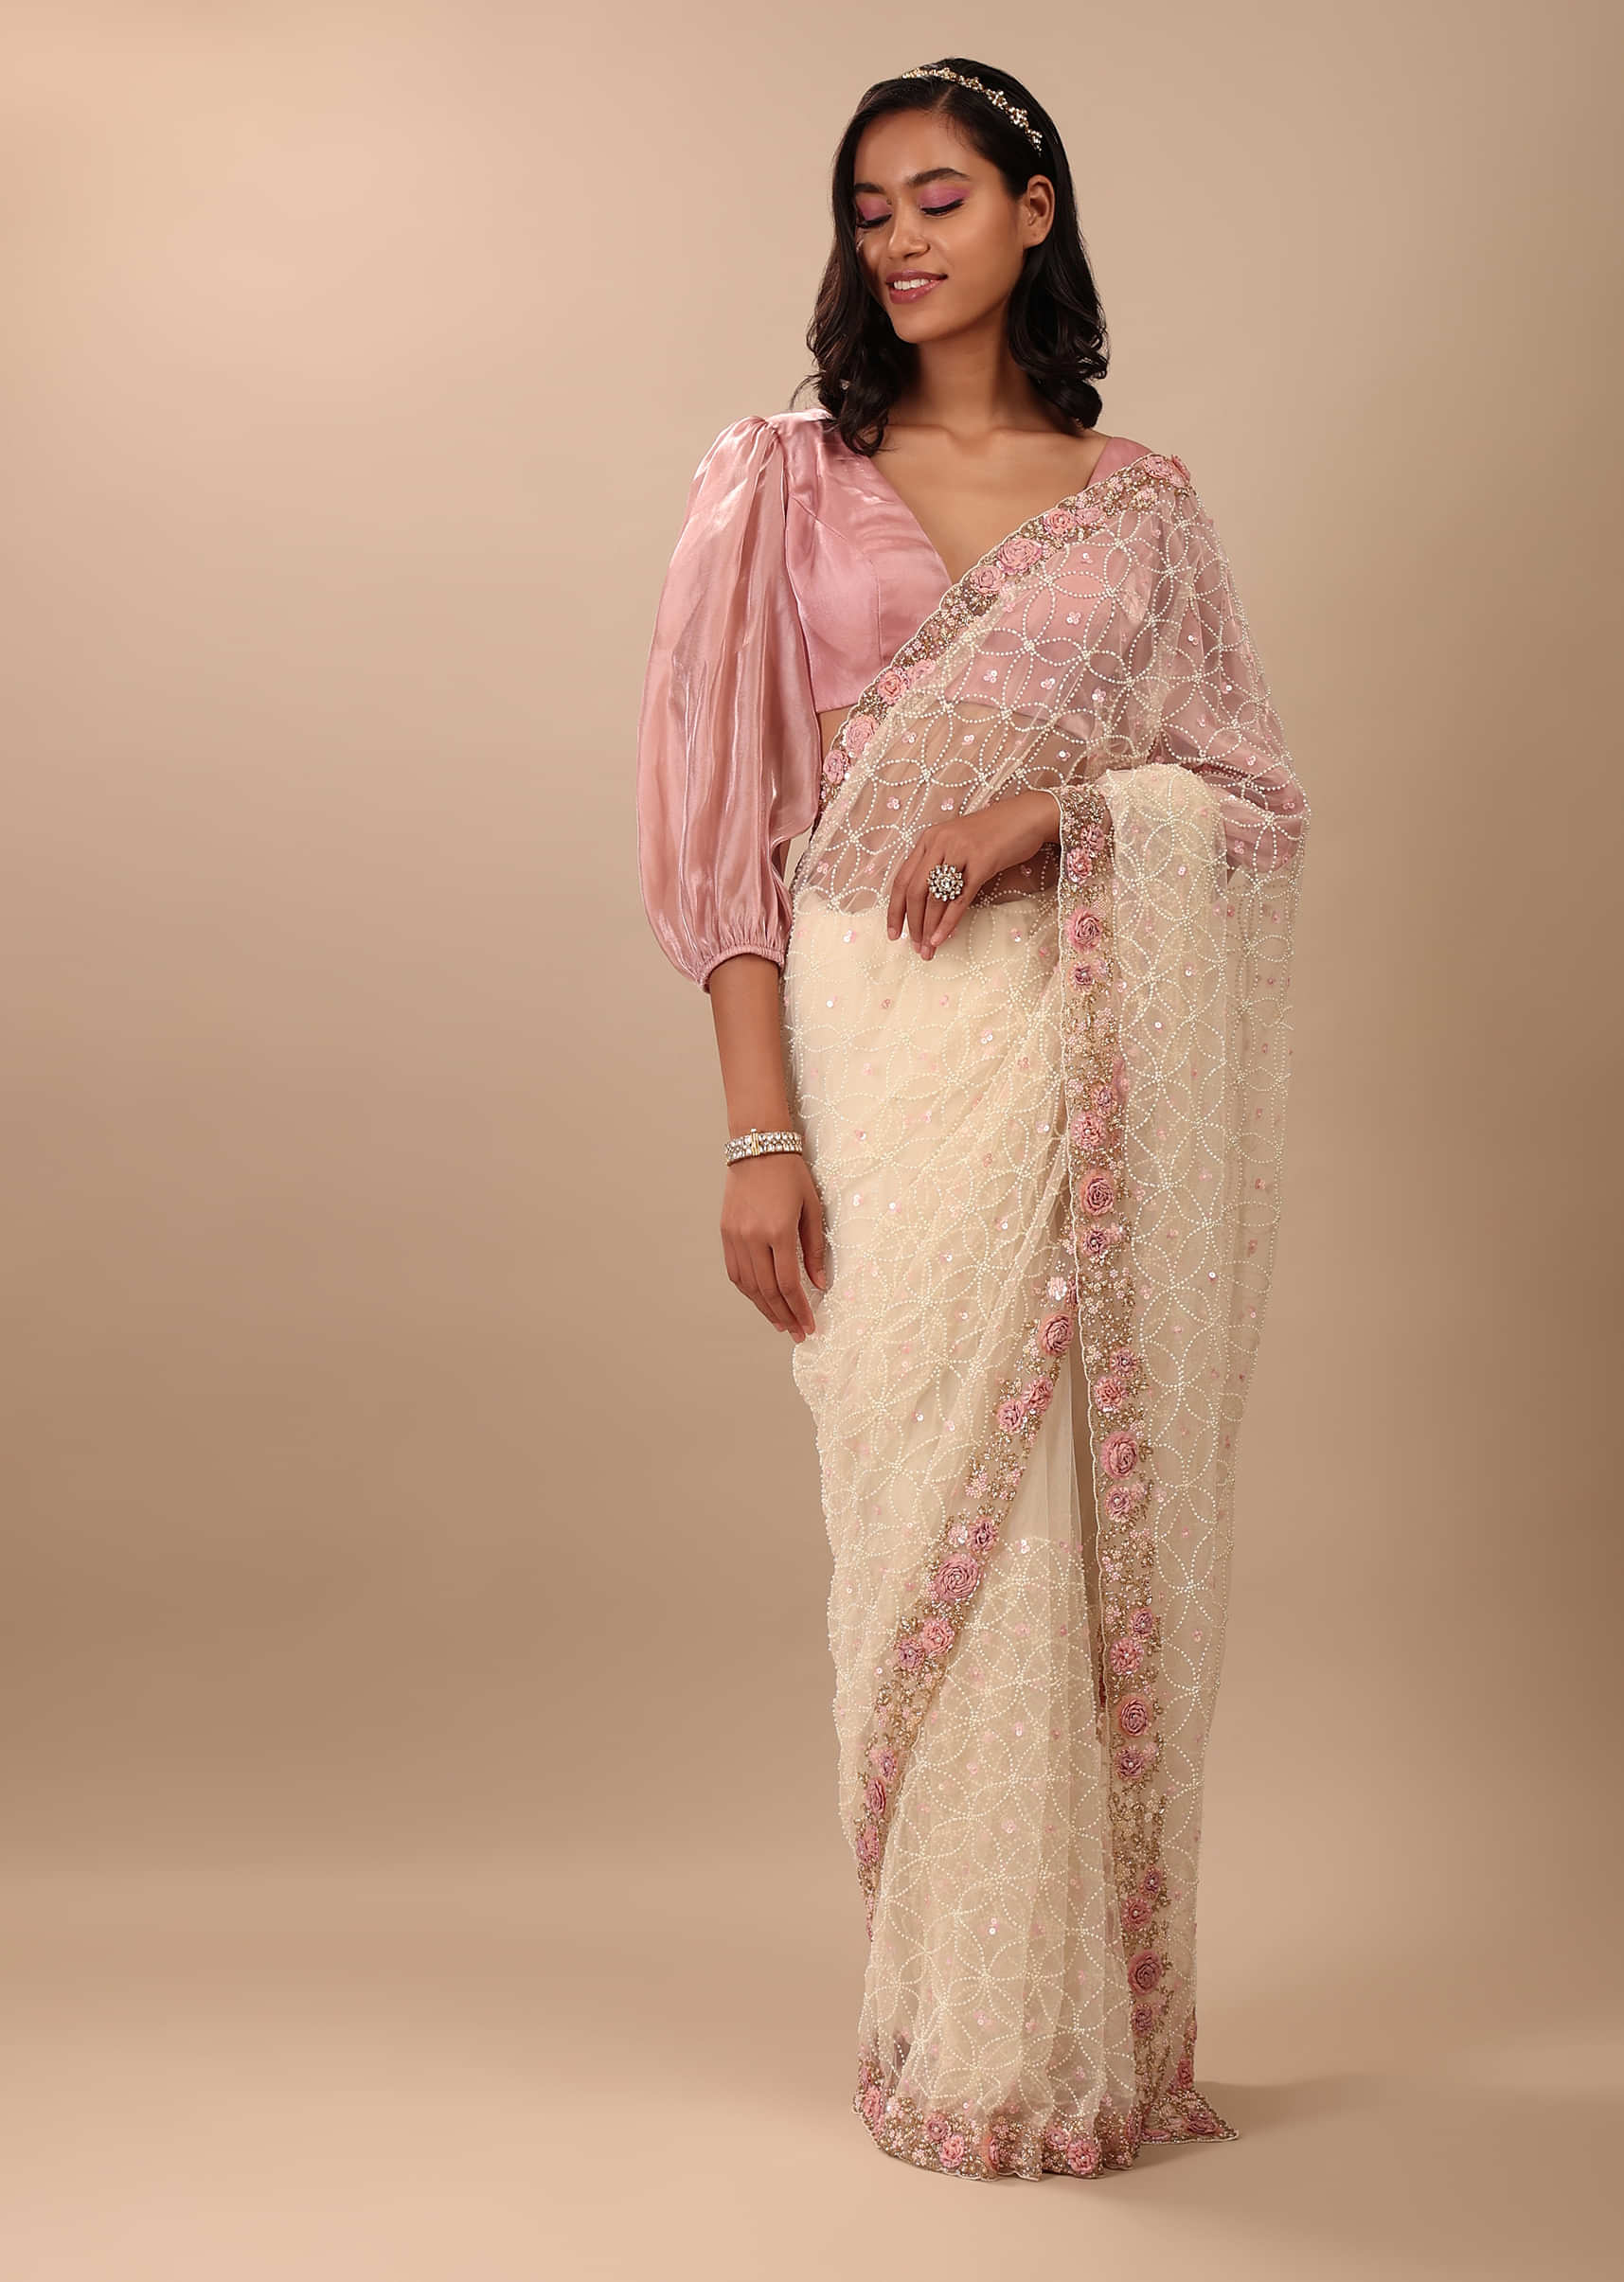 Pearl White Saree Fully Embroidered In Net Fabric